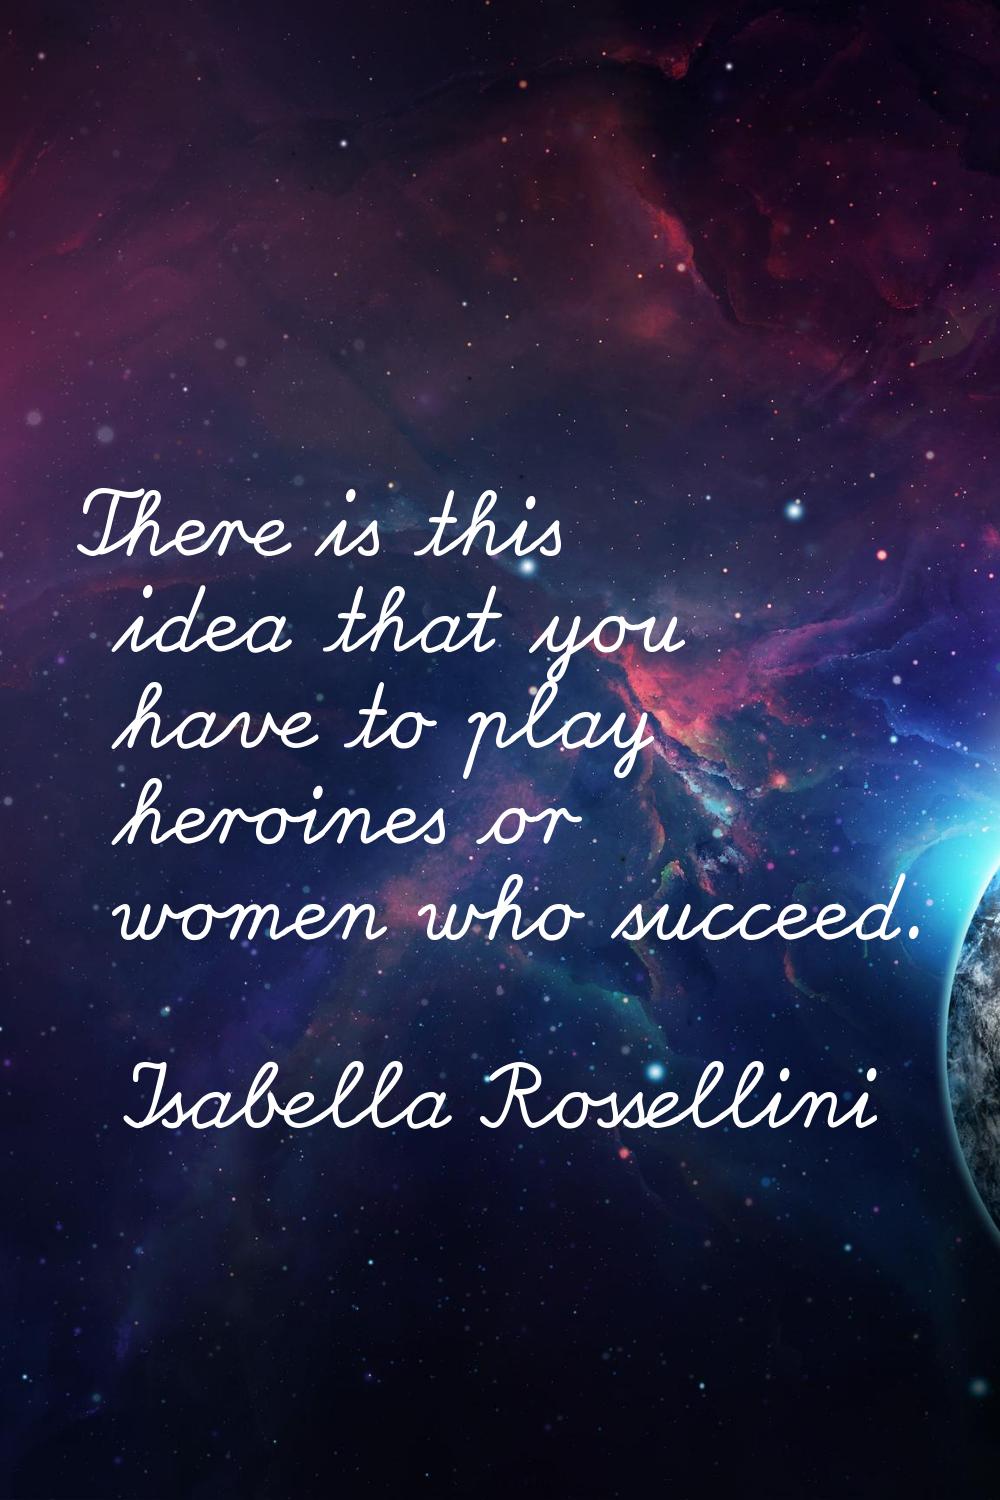 There is this idea that you have to play heroines or women who succeed.